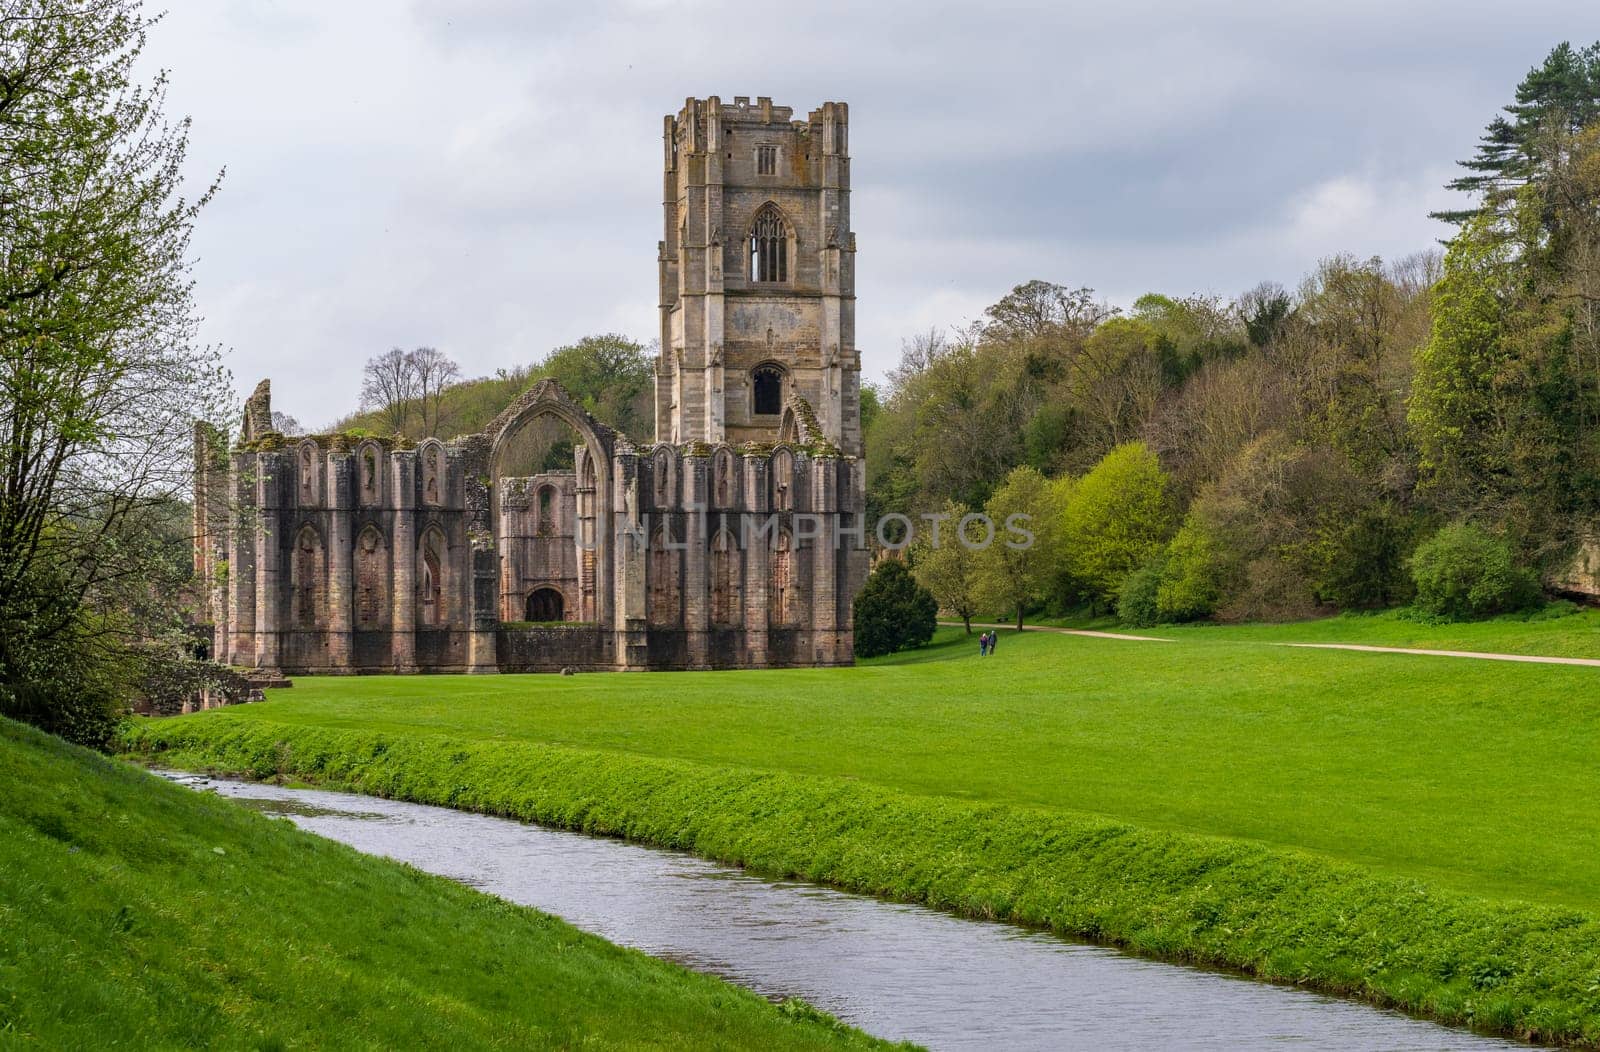 Springtime at Fountains Abbey ruins in Yorkshire, England by steheap